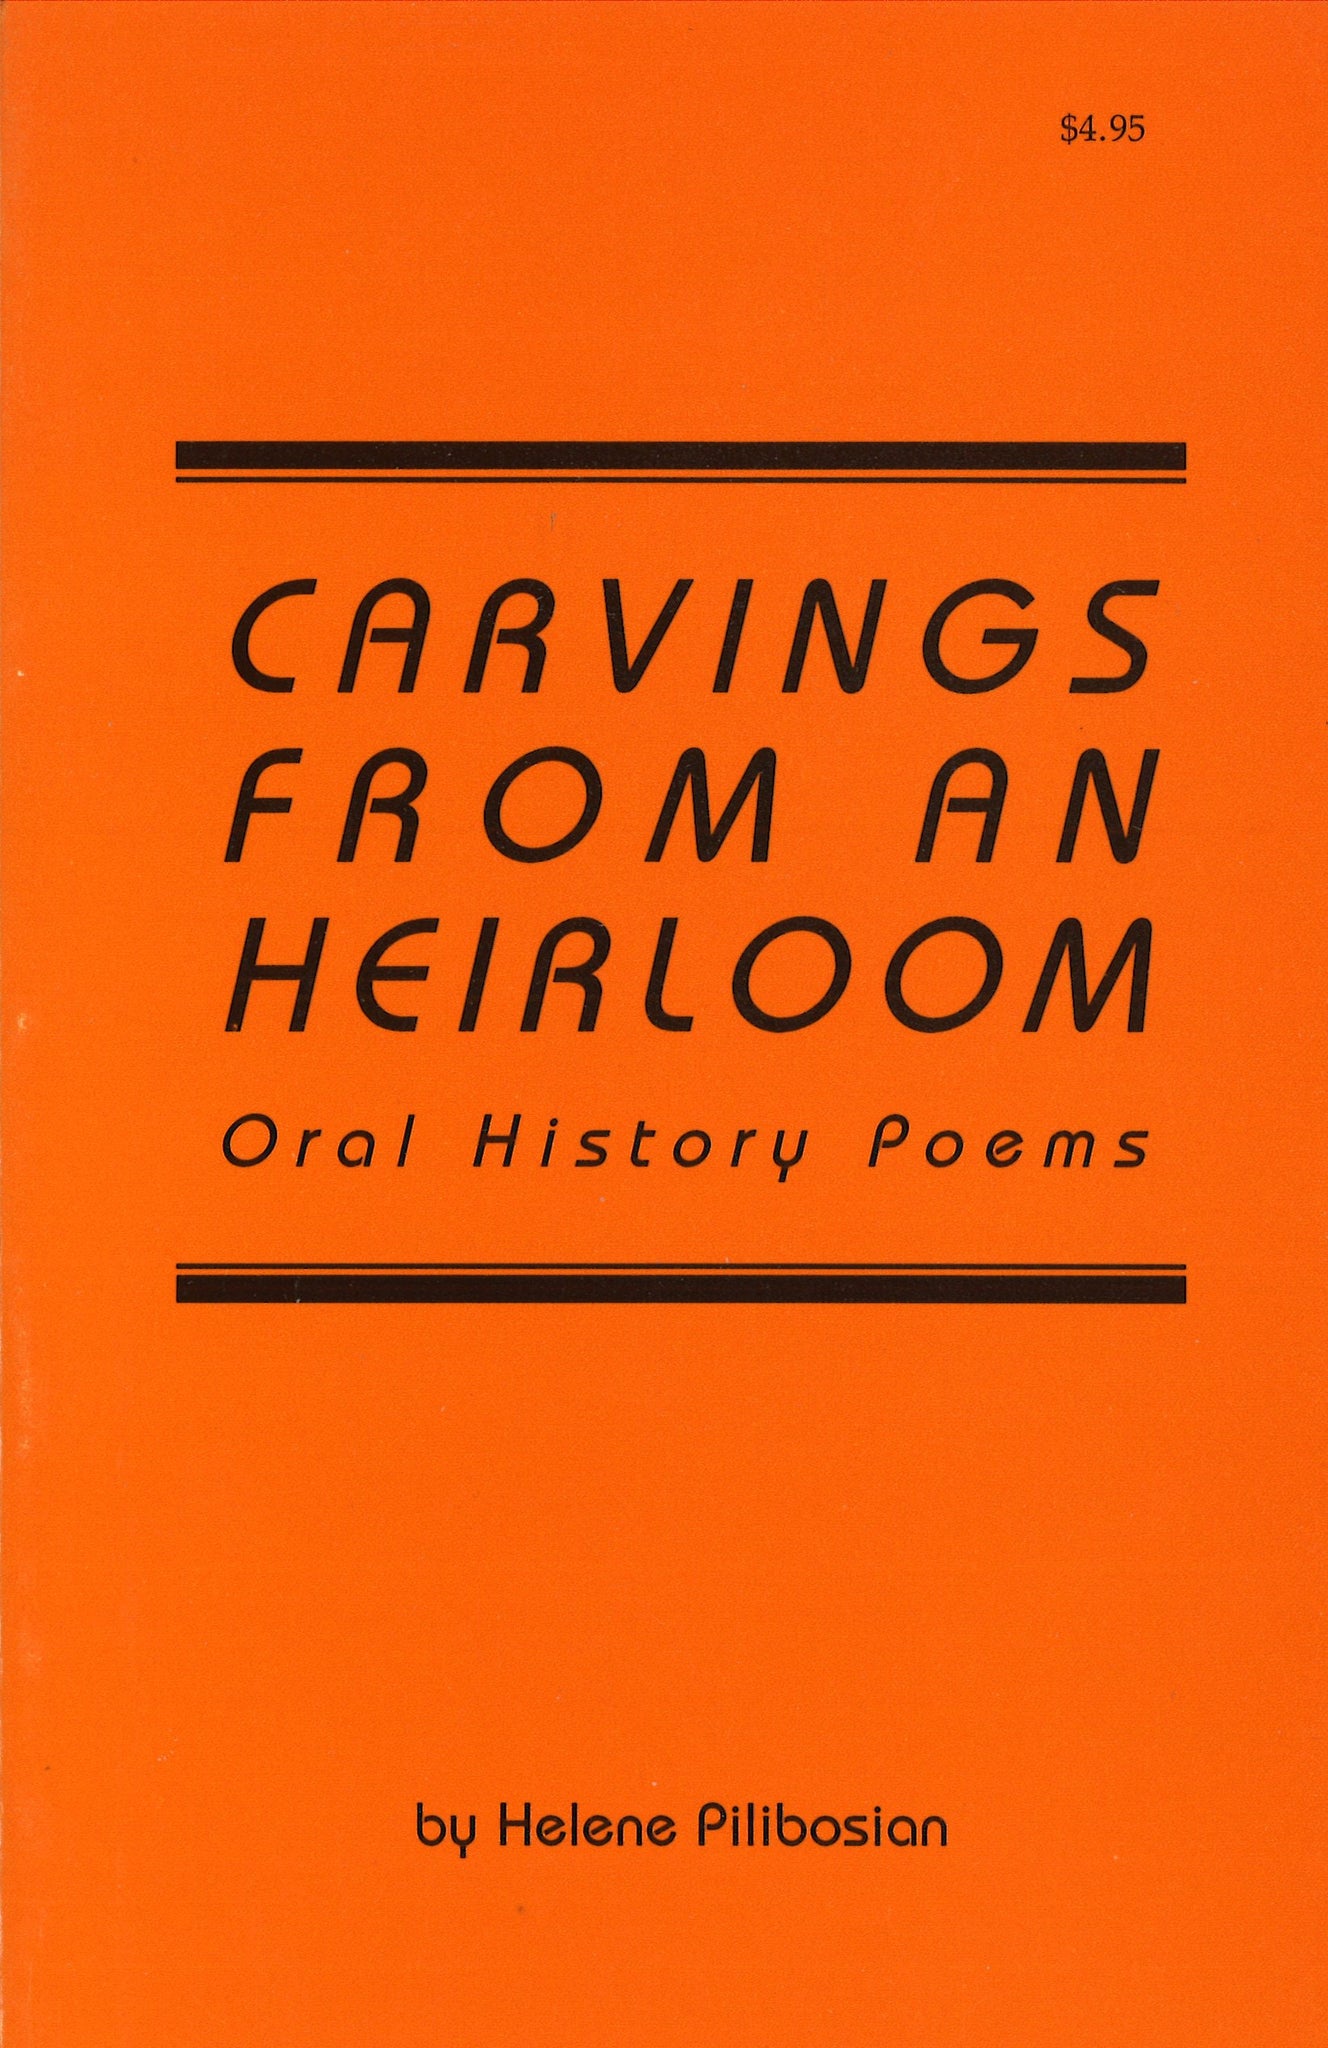 CARVINGS FROM AN HEIRLOOM: ORAL HISTORY POEMS